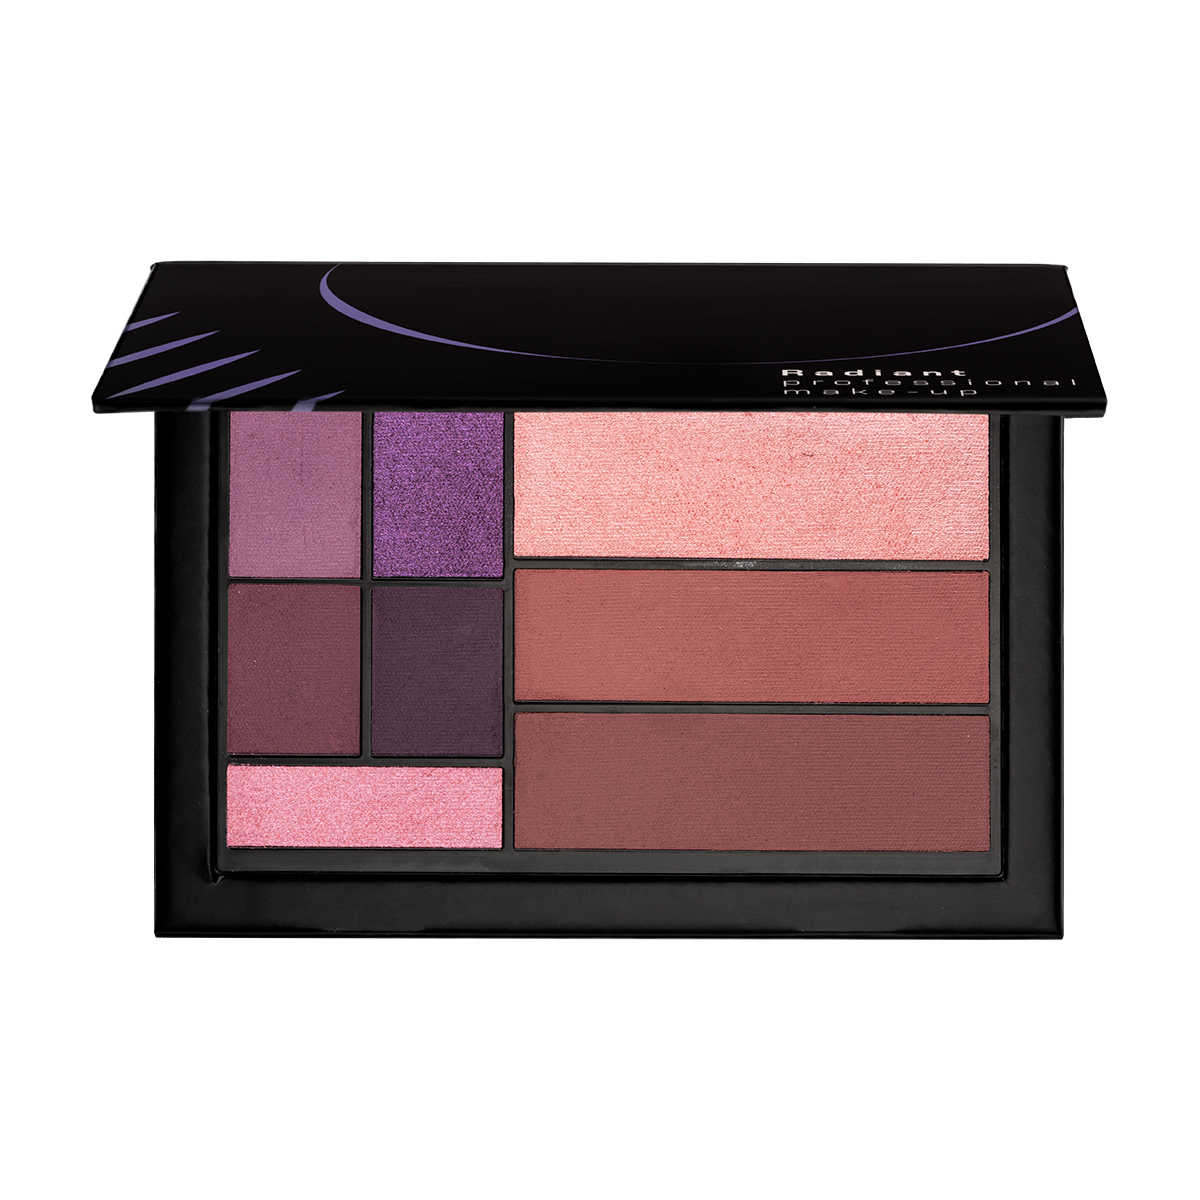 Special Edition Total Look Bright Collection Palette